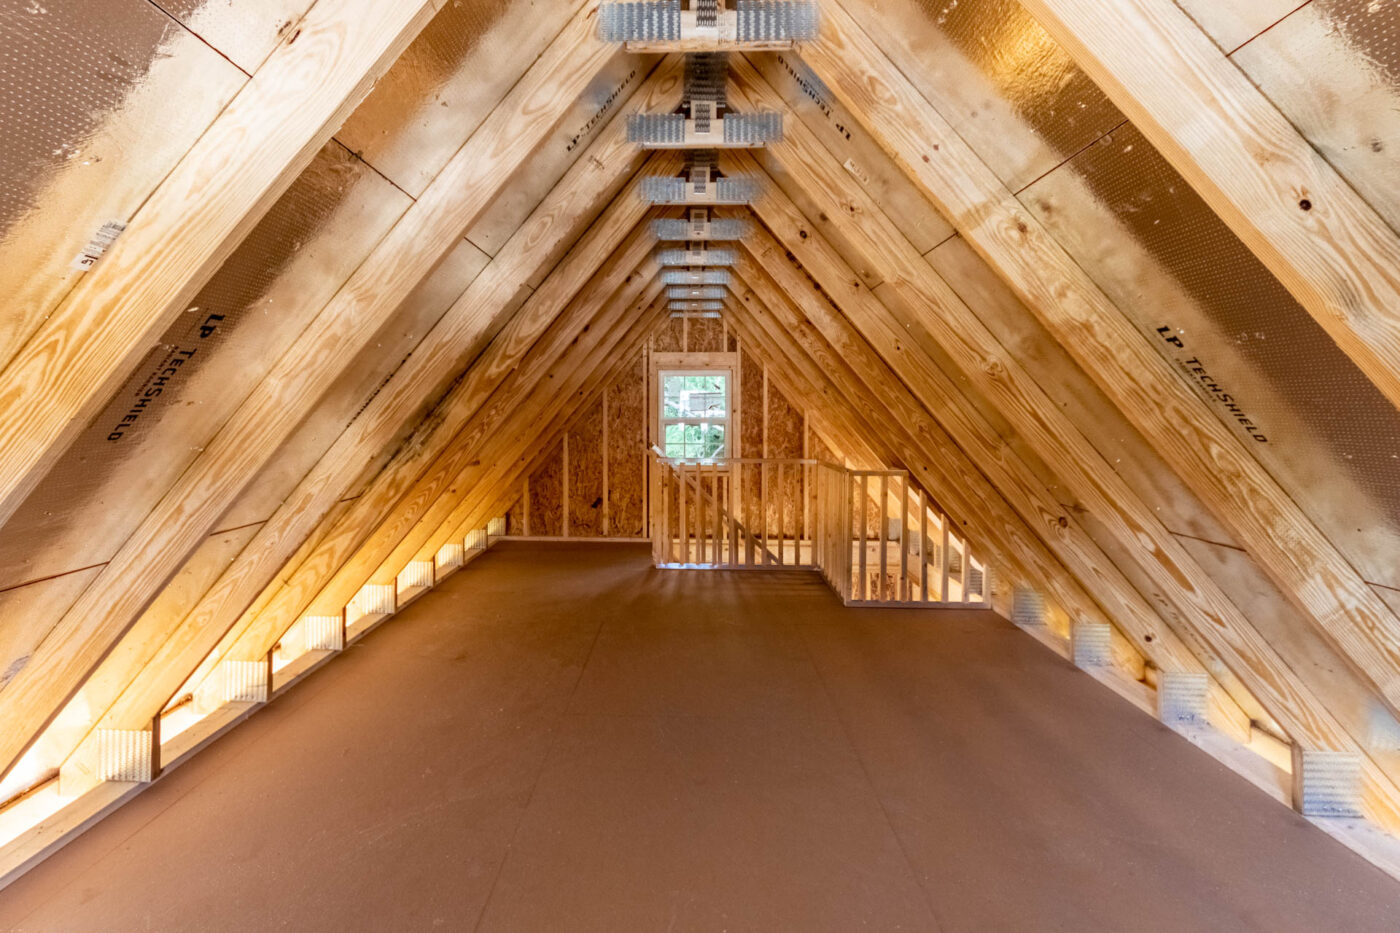 The interior of a garage with attic trusses.